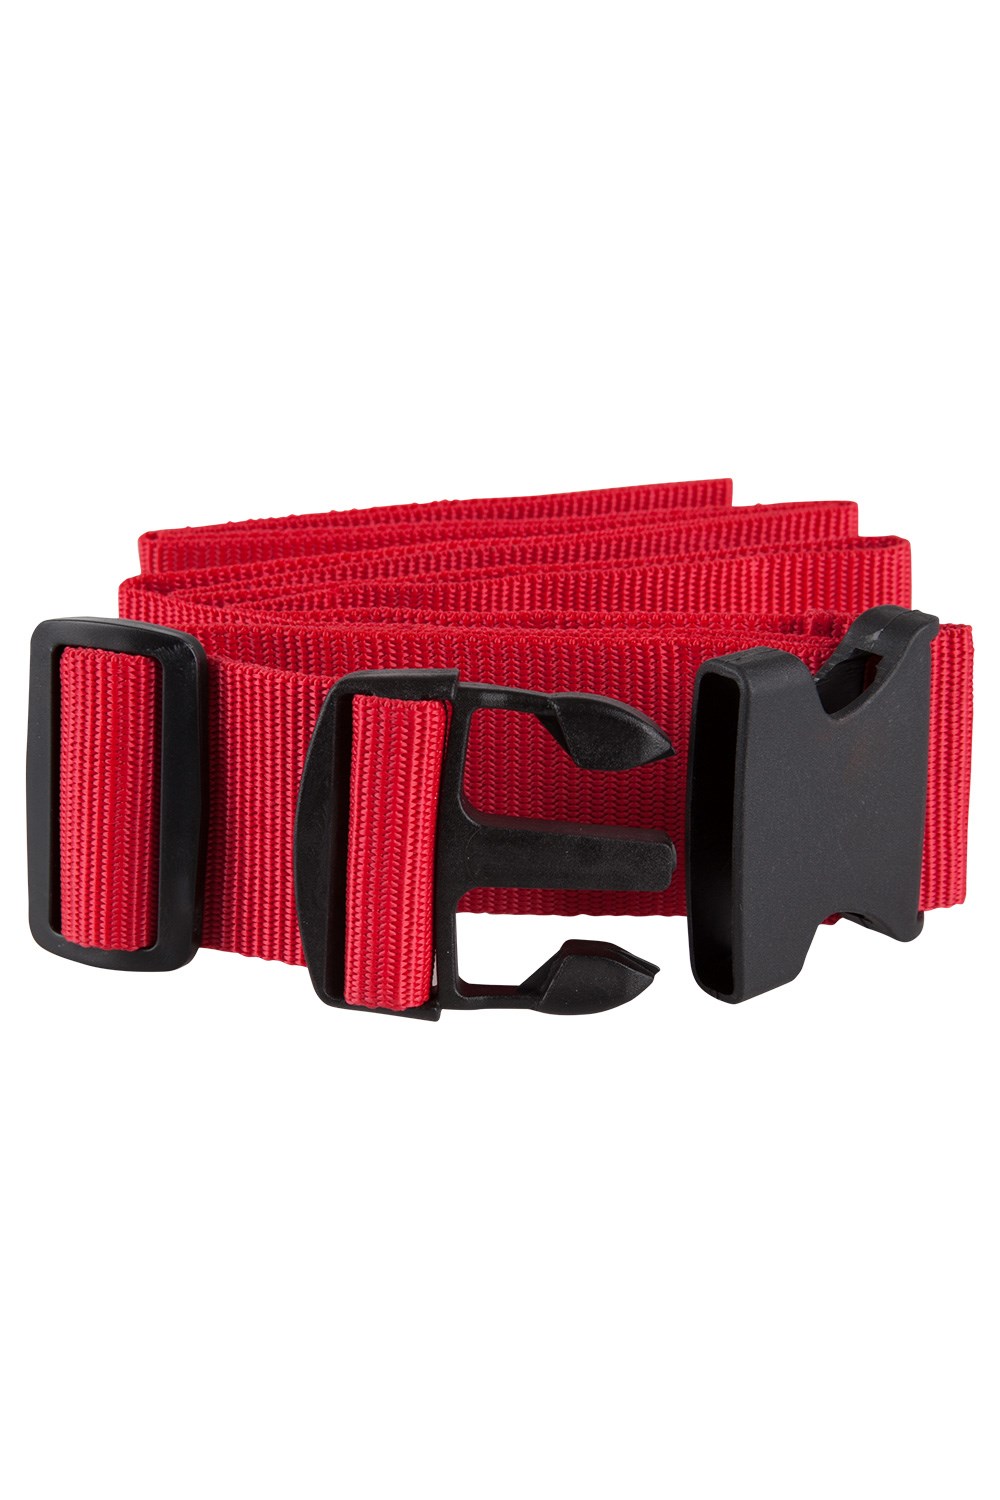 Mountain Warehouse Luggage Strap Red